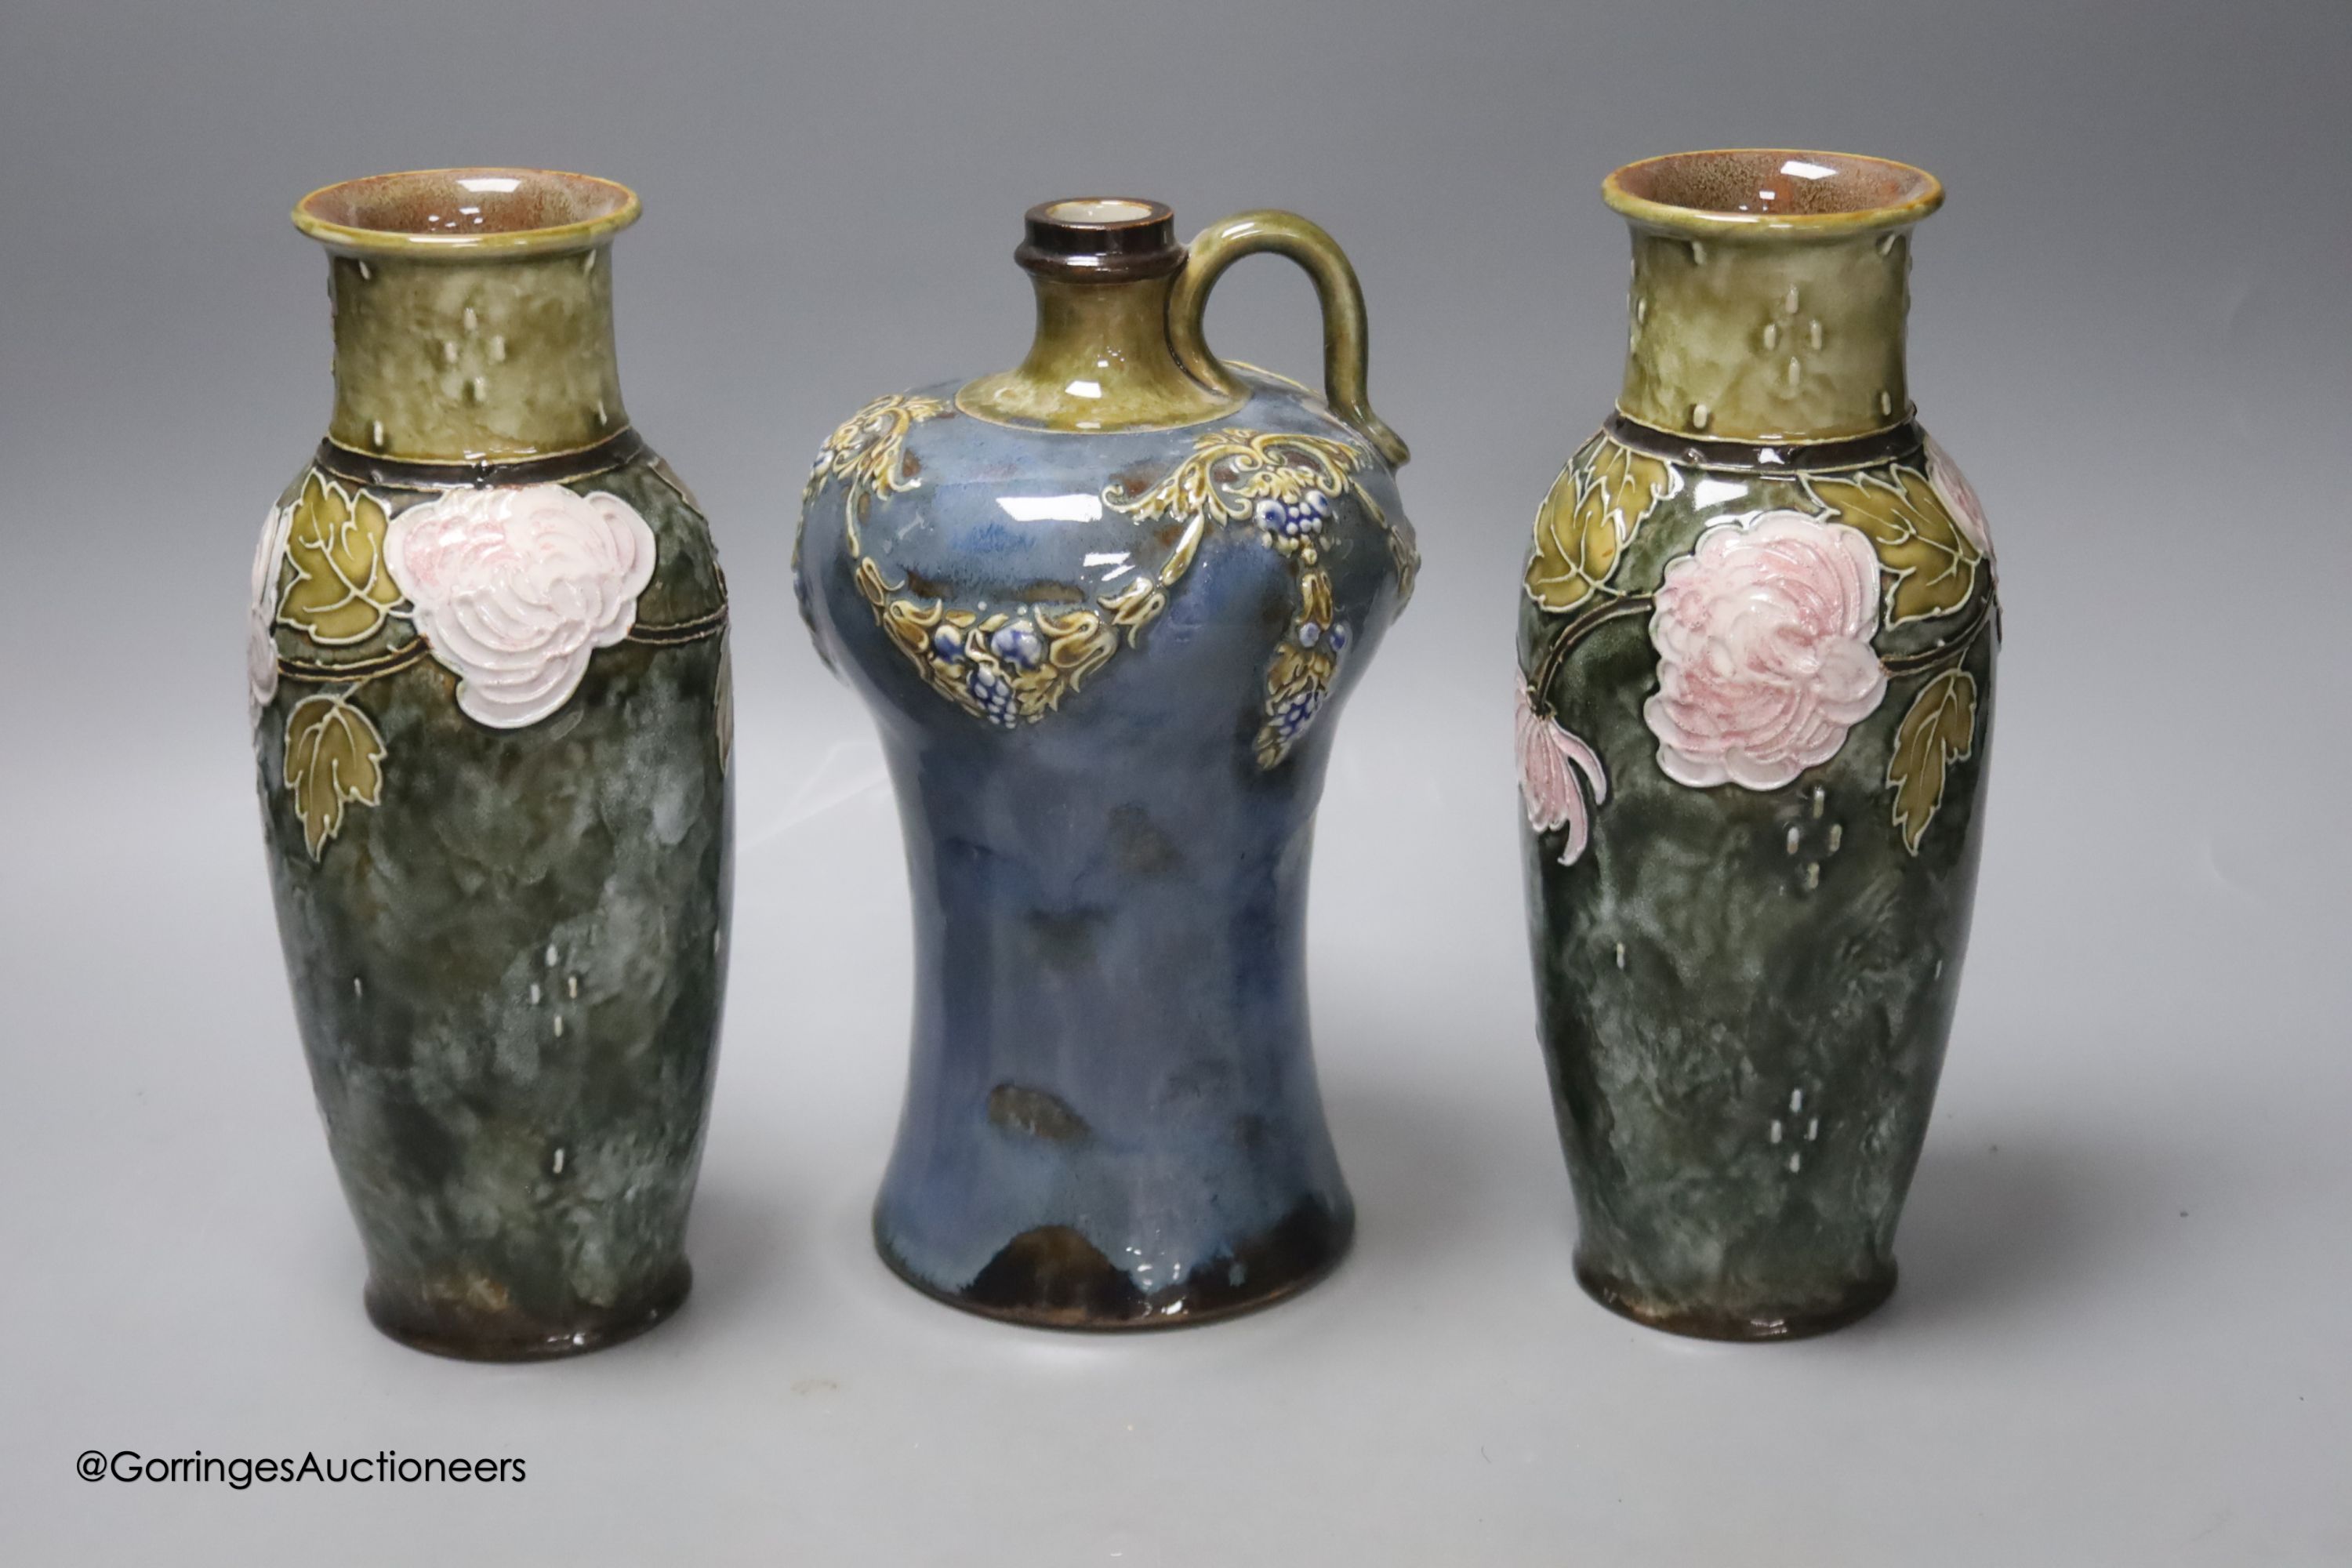 A pair of Doulton vases, 23cm high, together with a Doulton flask, 22cm high (3)